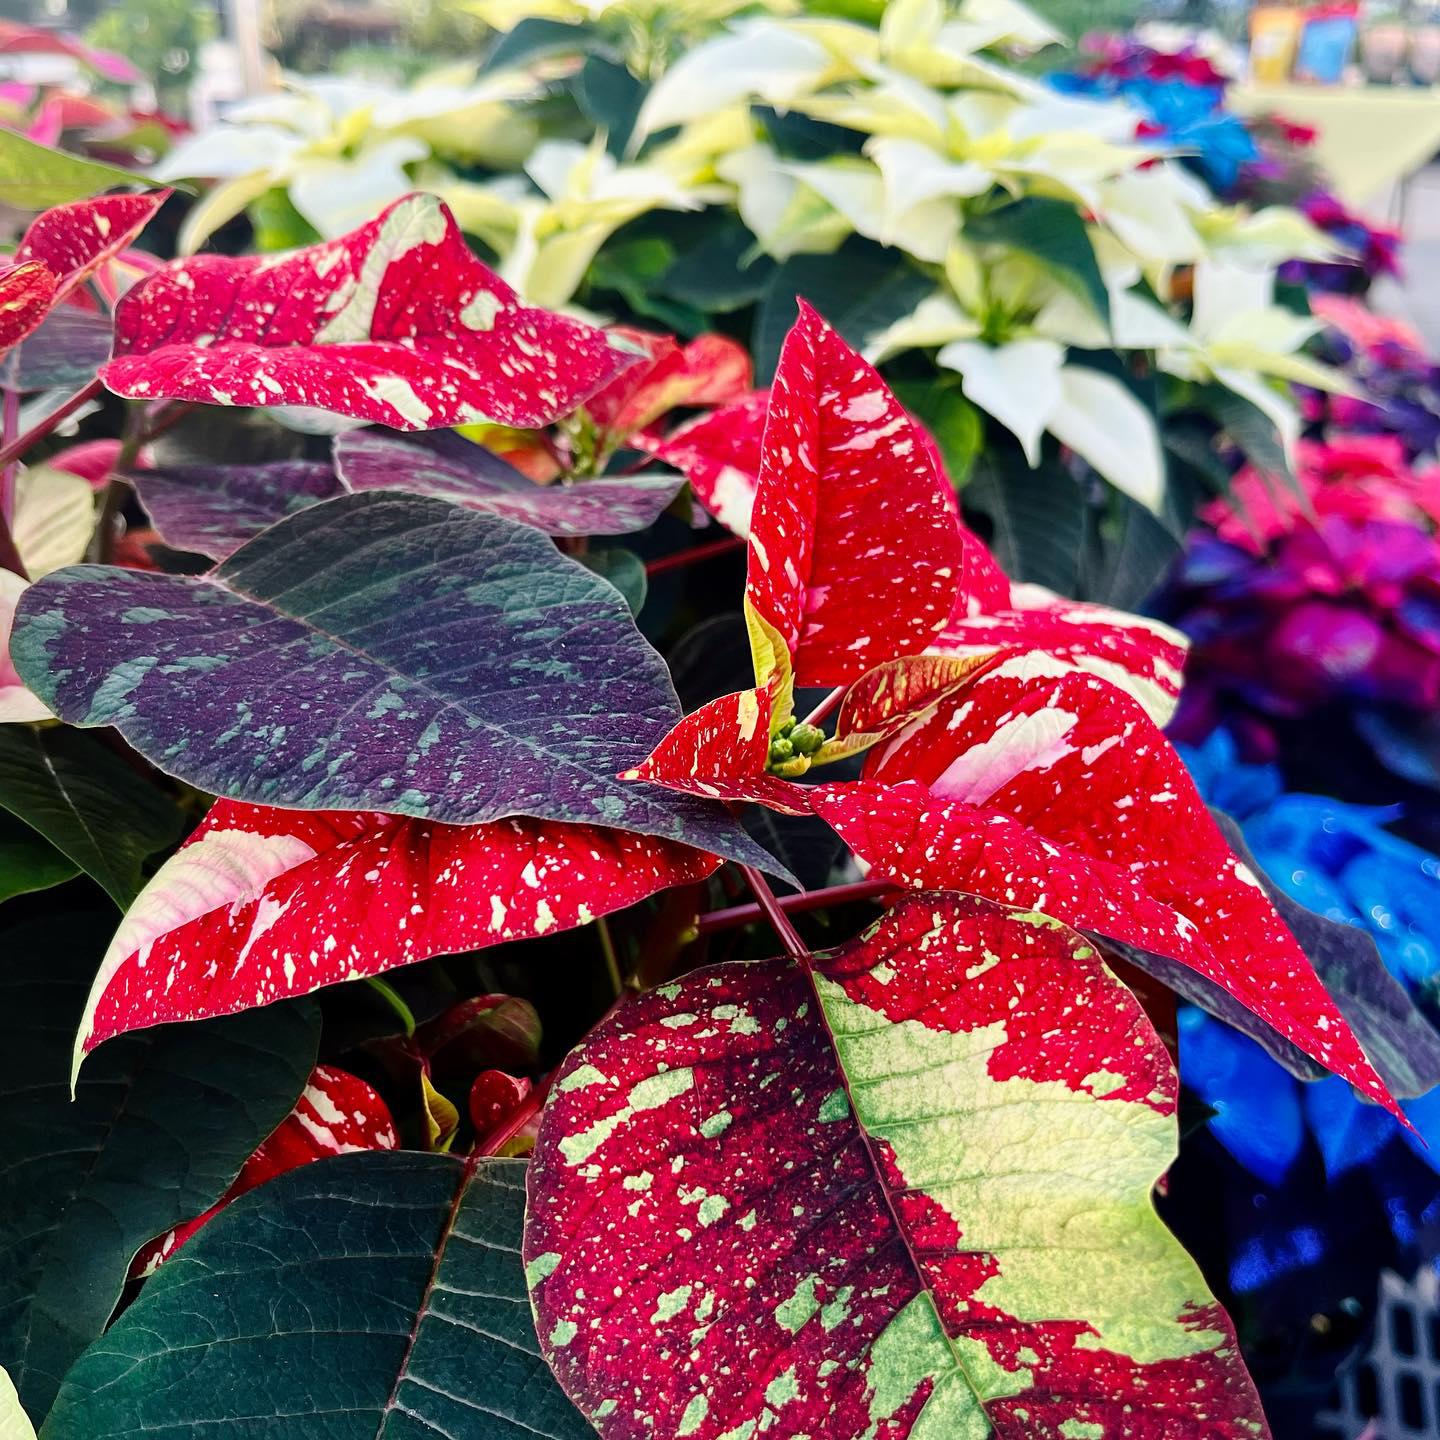 Poinsettias available in many colors and sizes.